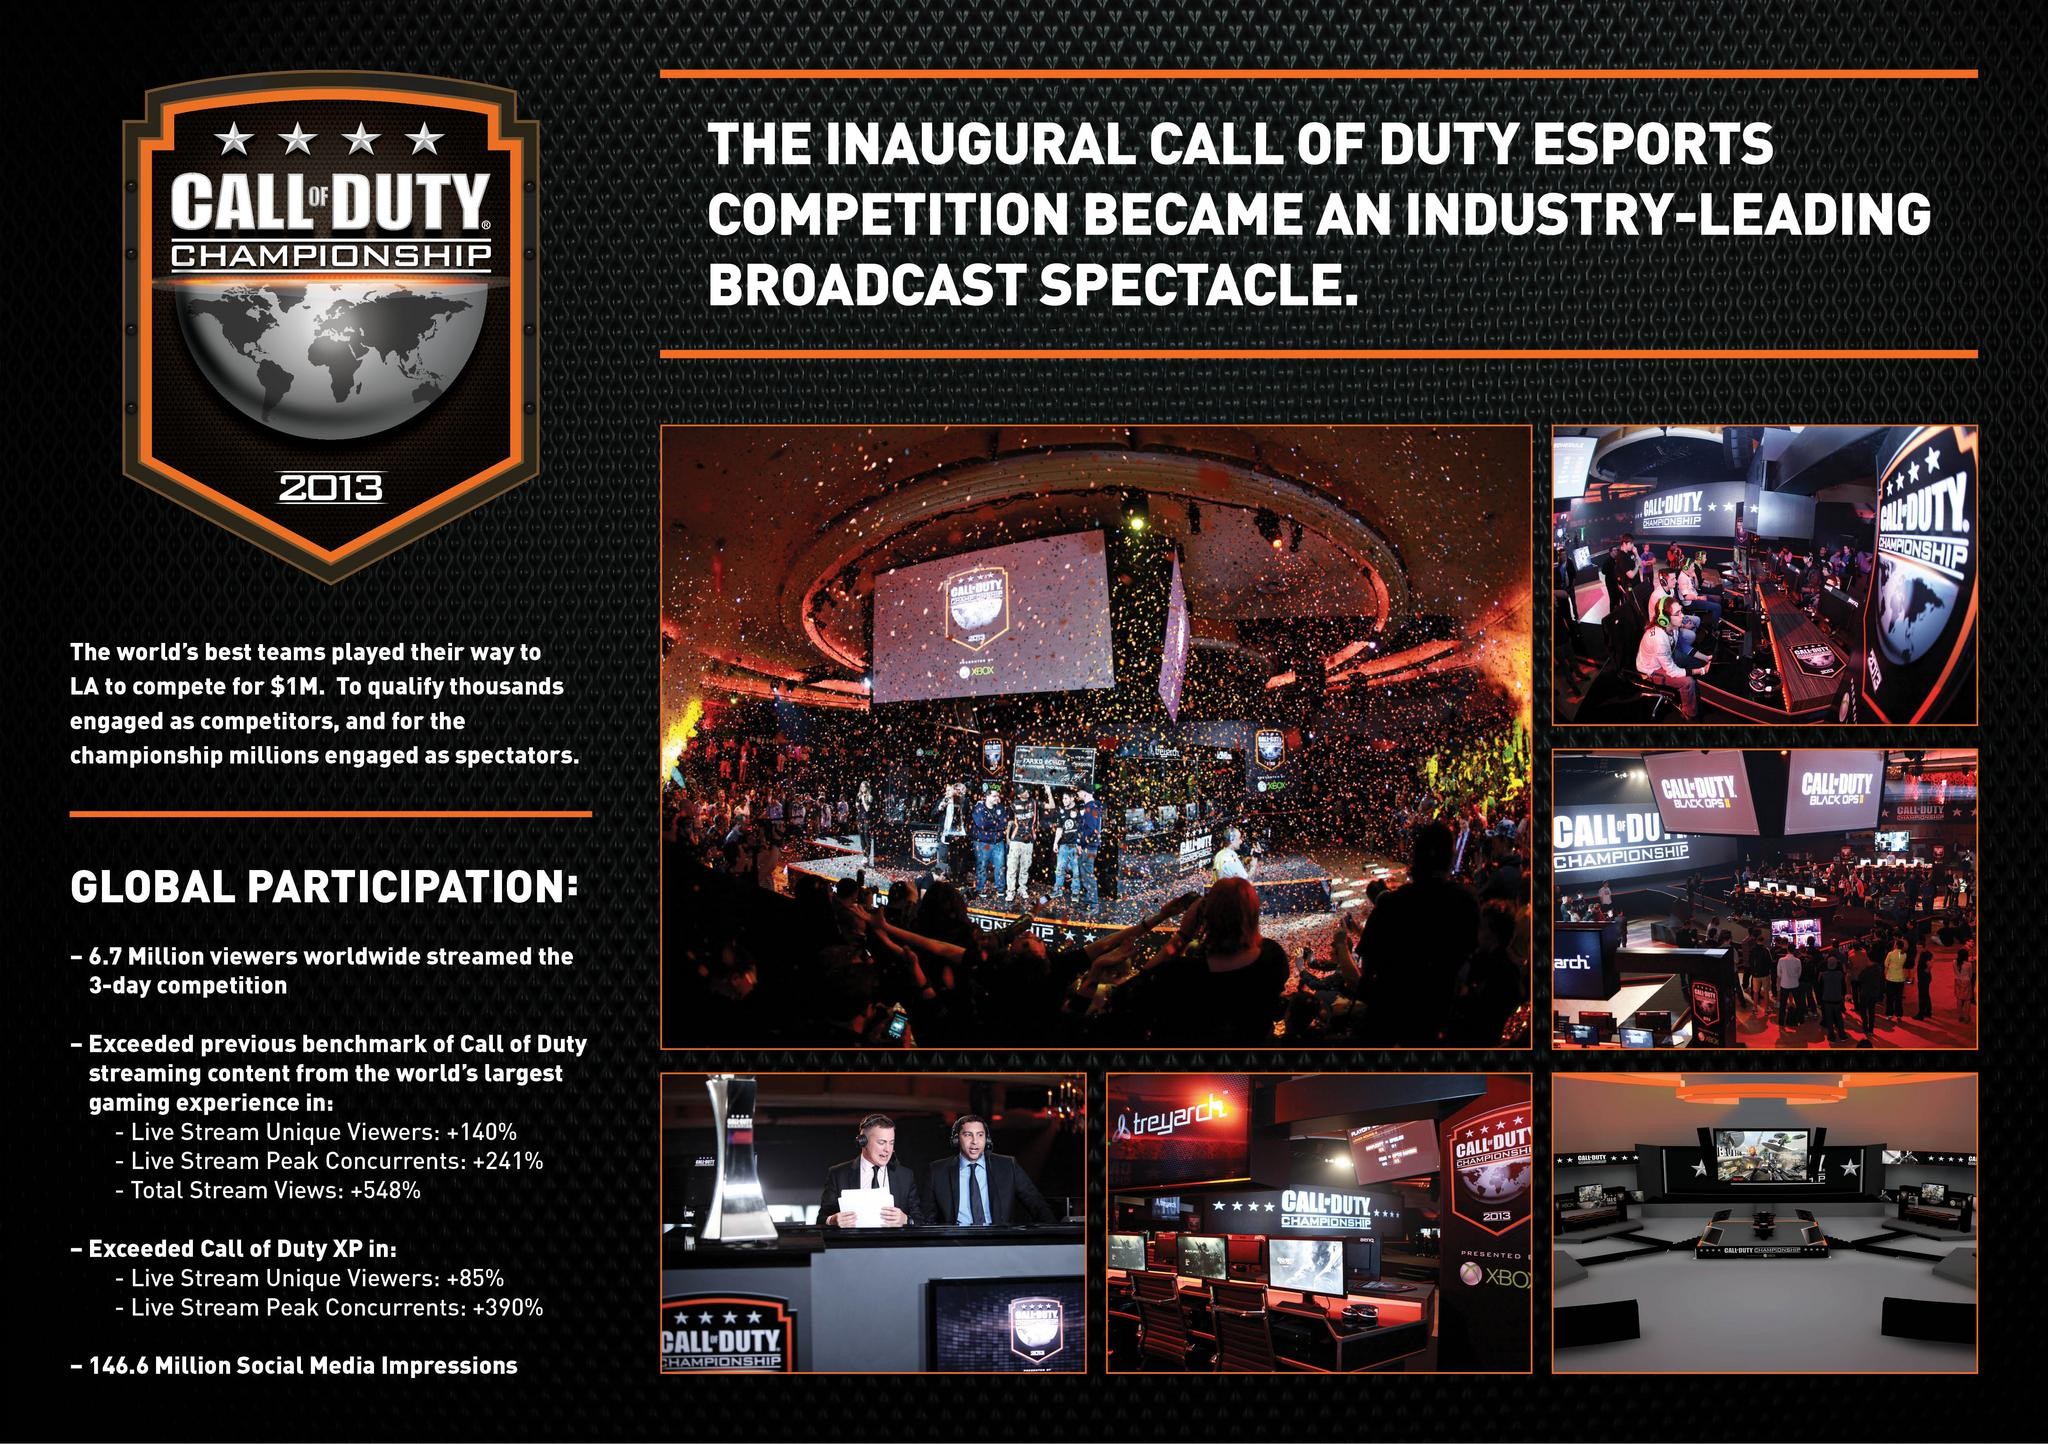 CALL OF DUTY CHAMPIONSHIP 2013 PRESENTED BY XBOX 360